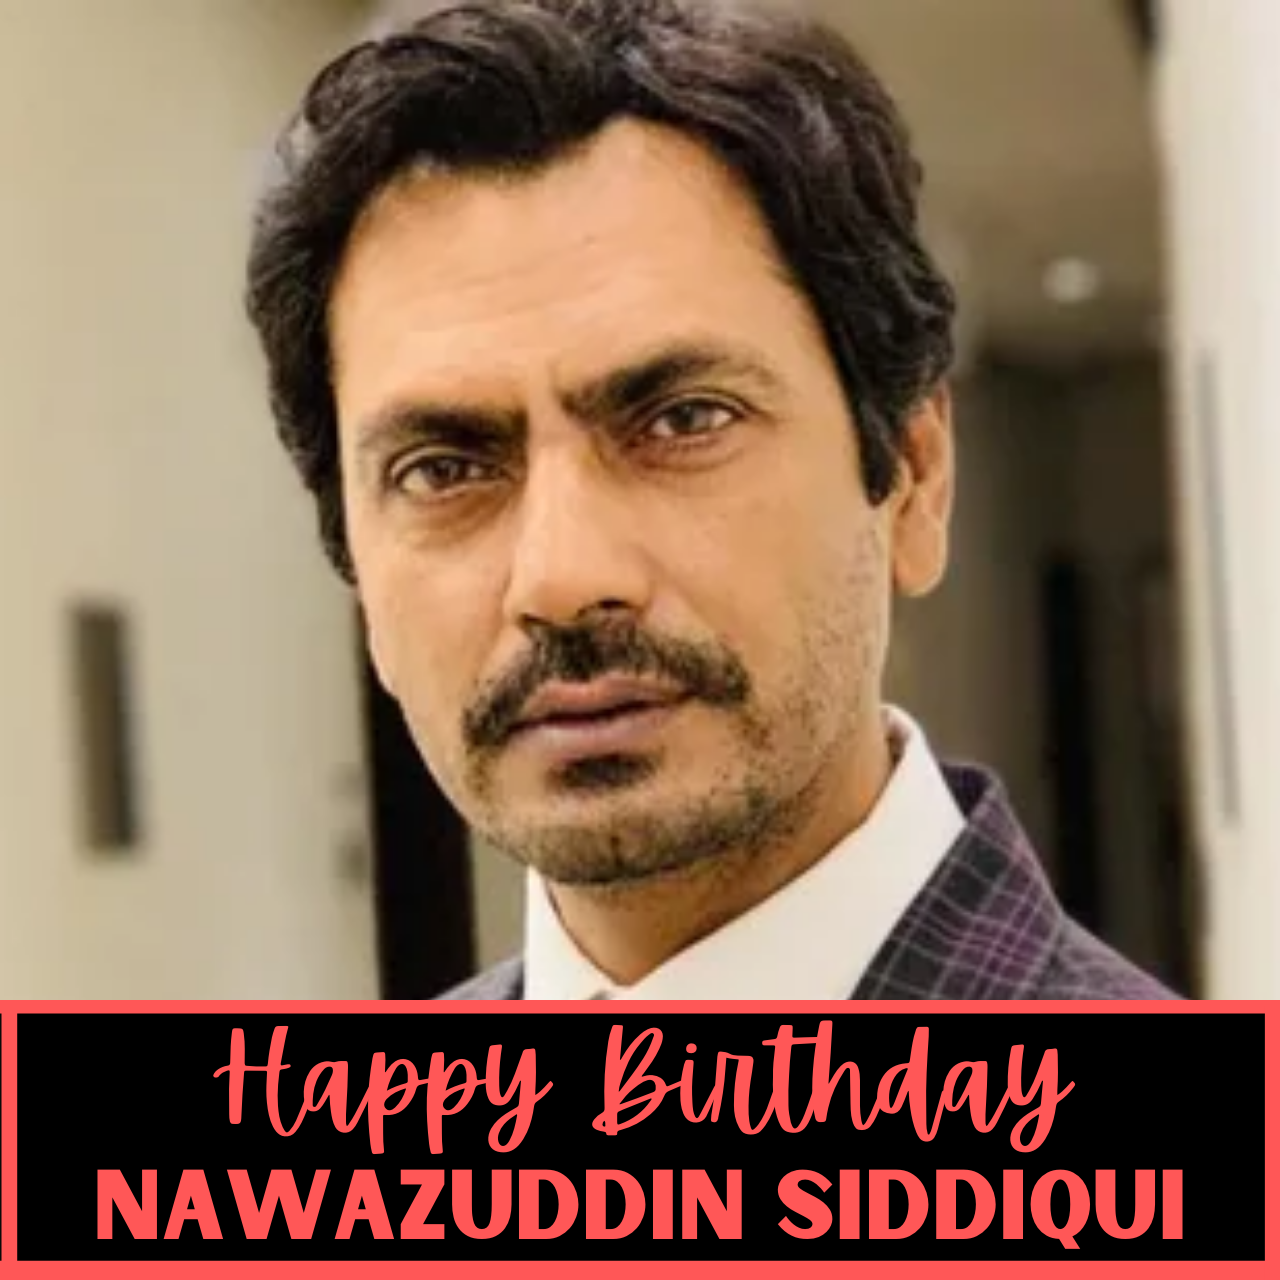 Happy Birthday Nawazuddin Siddique: Wishes, Images (photo), Quotes, Greetings, and WhatsApp Status Video